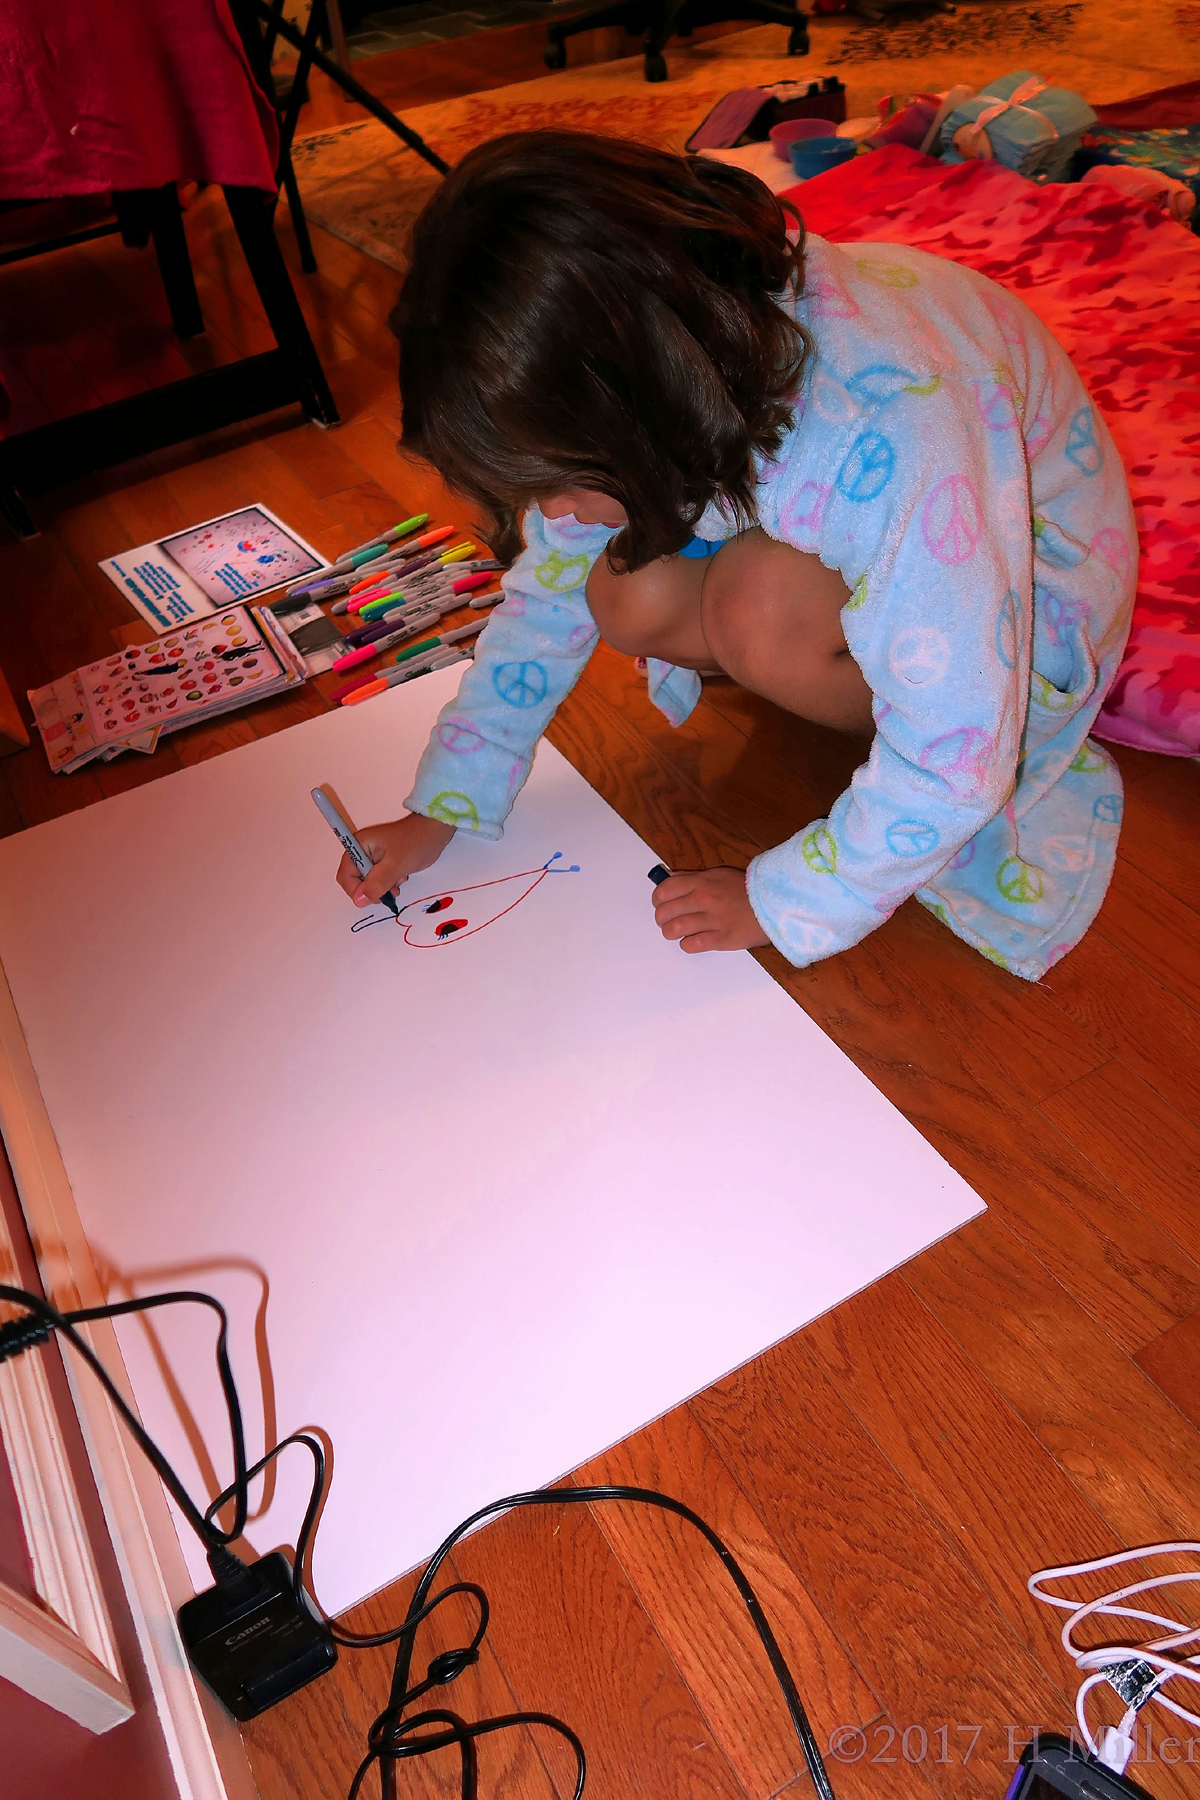 Ava's Friend Is Writing On The Spa Birthday Card. 